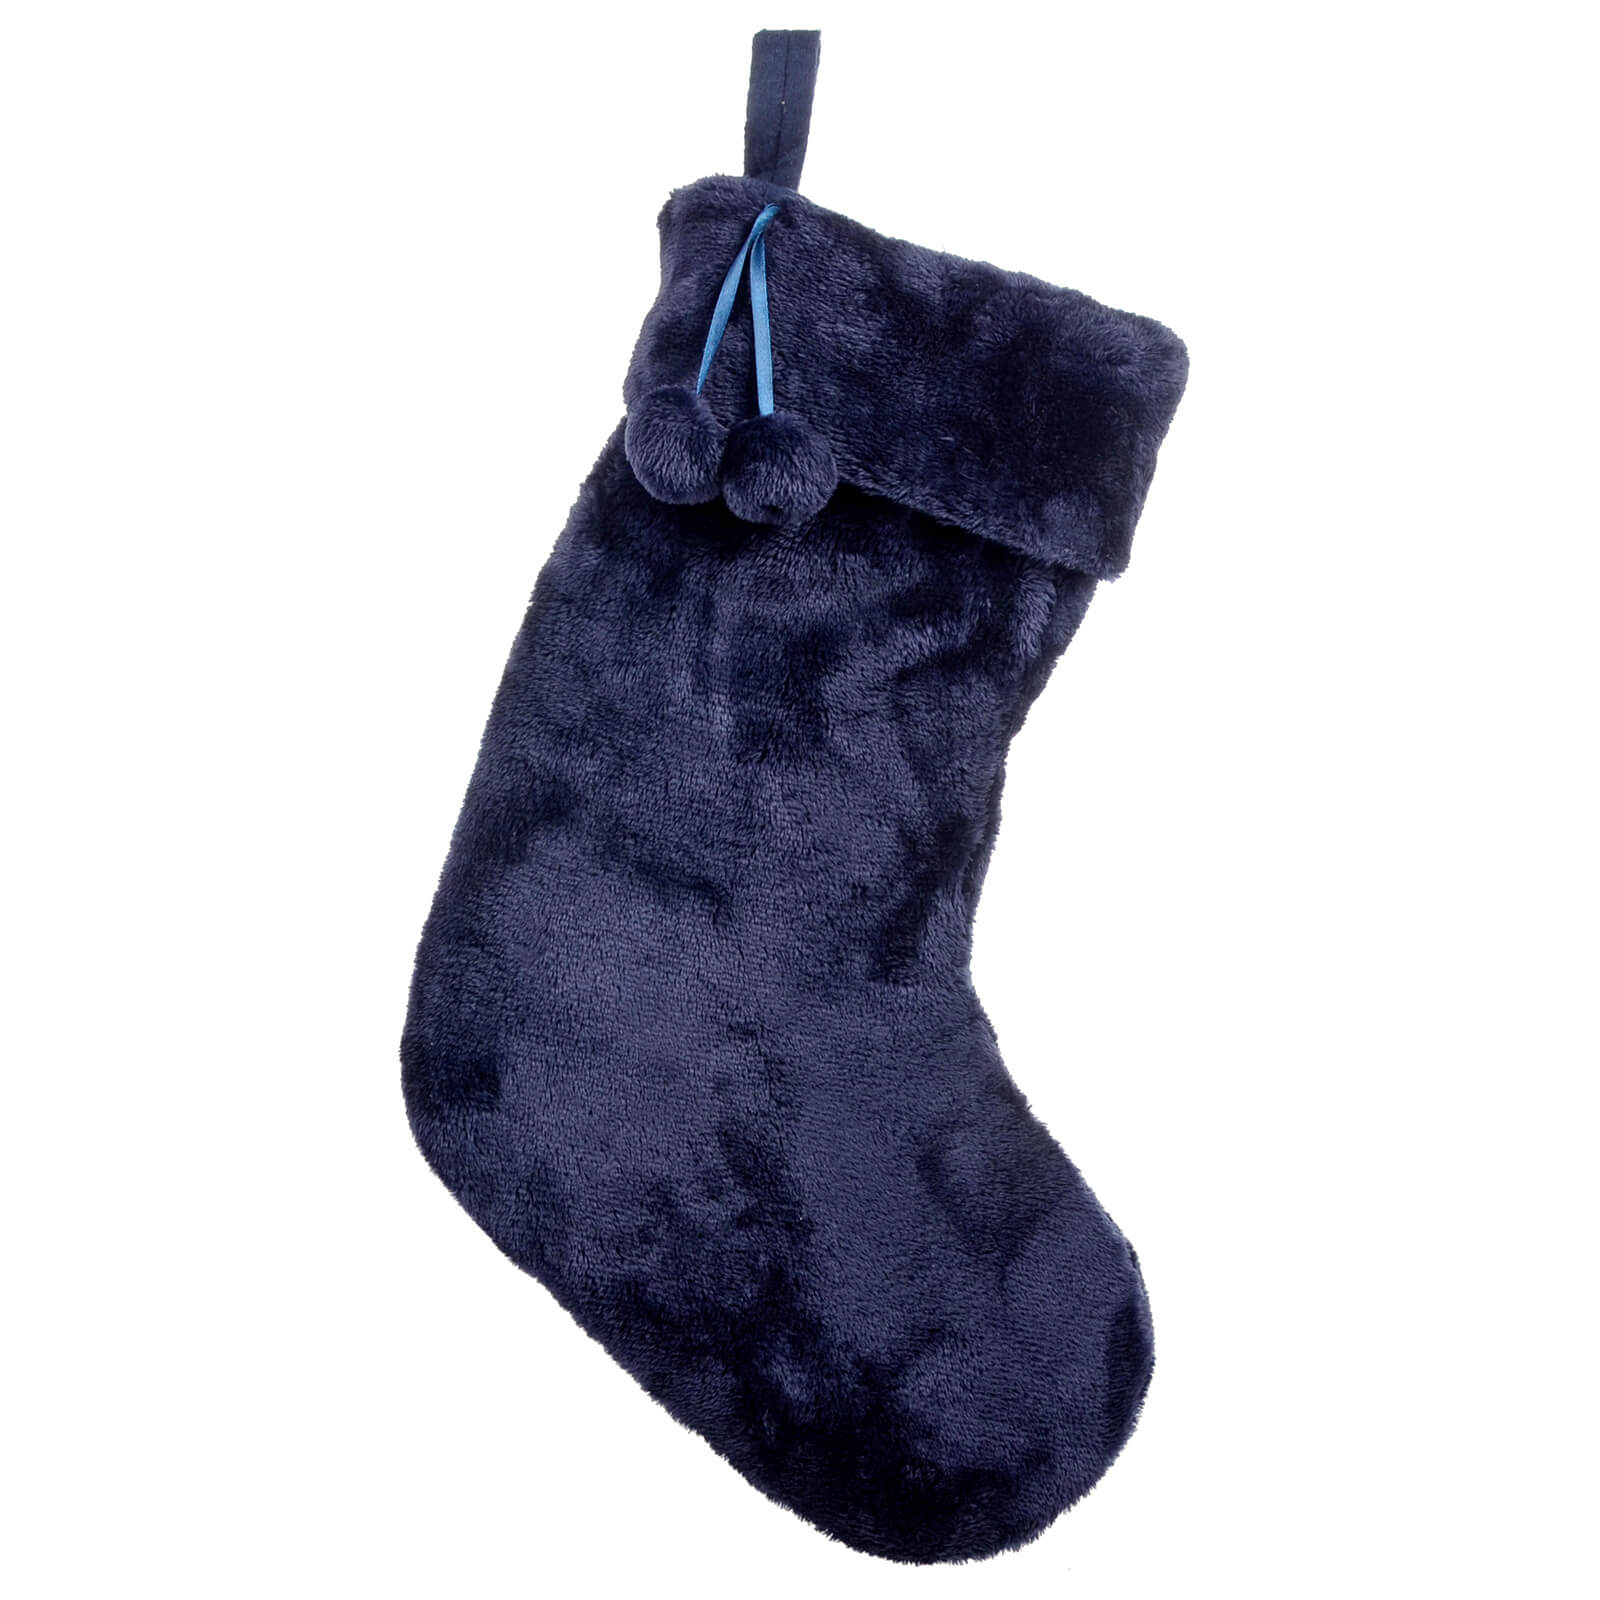 large navy faux fur Christmas stocking with matching pom poms and hanging loop